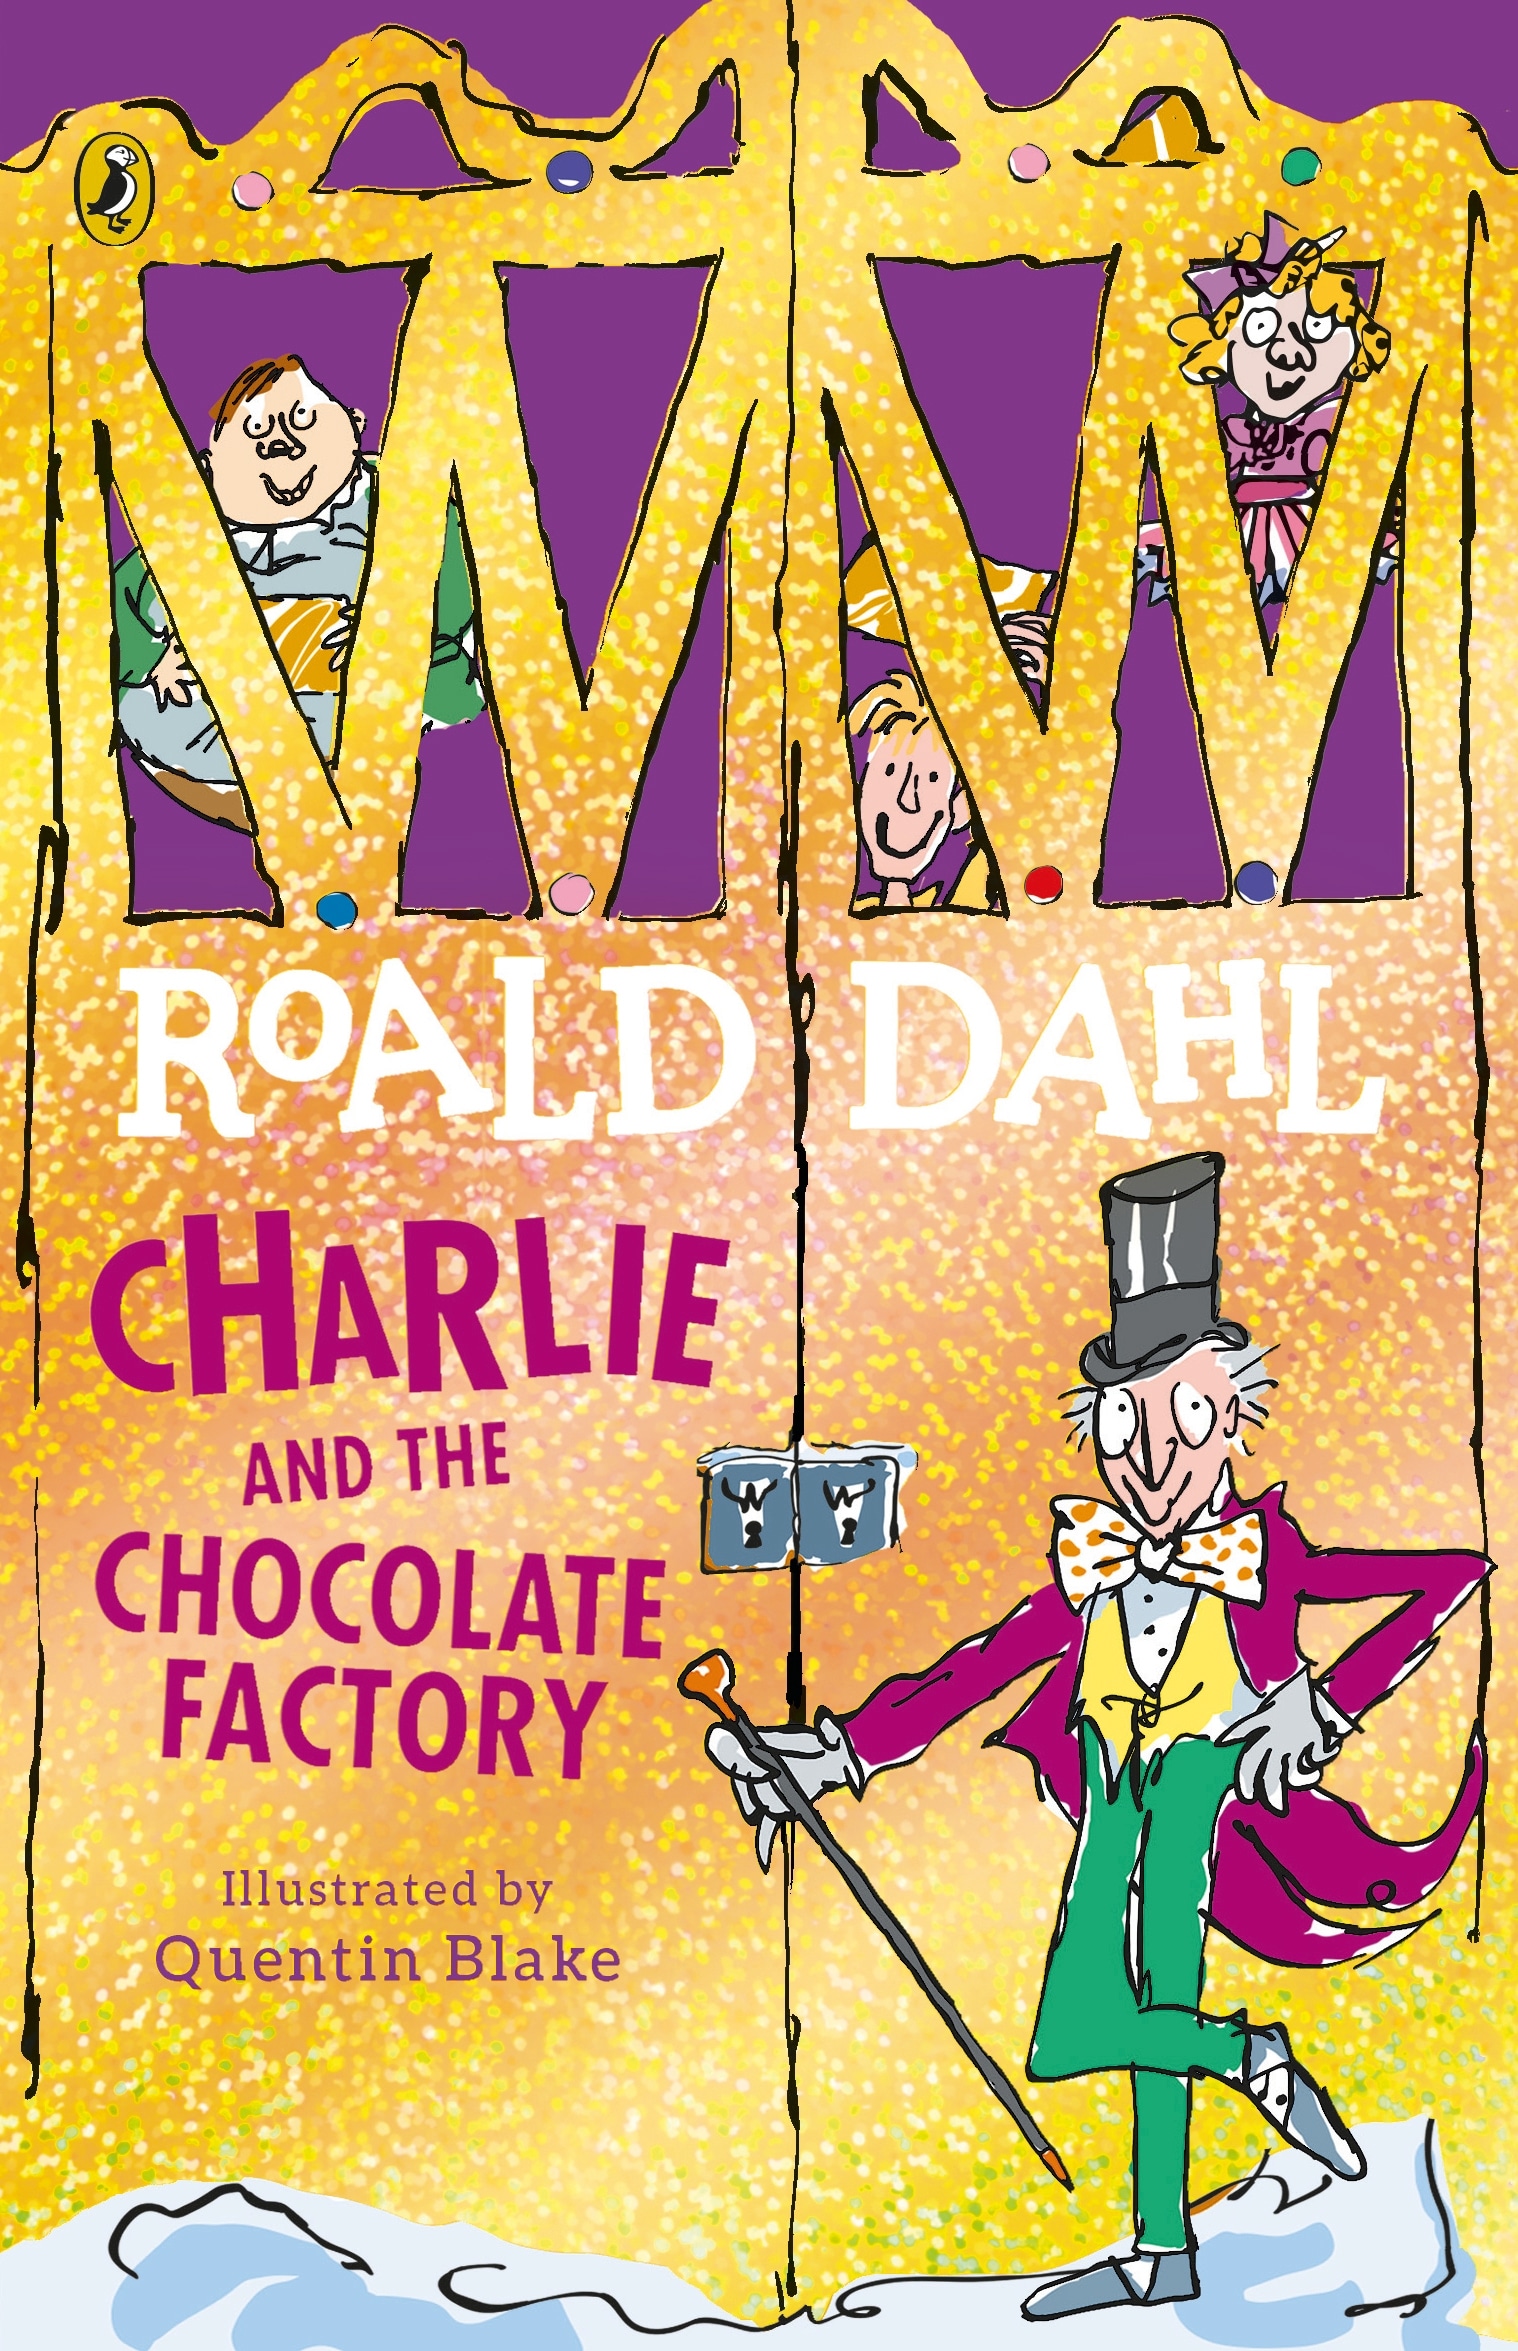 Book “Charlie and the Chocolate Factory” by Roald Dahl — February 11, 2016